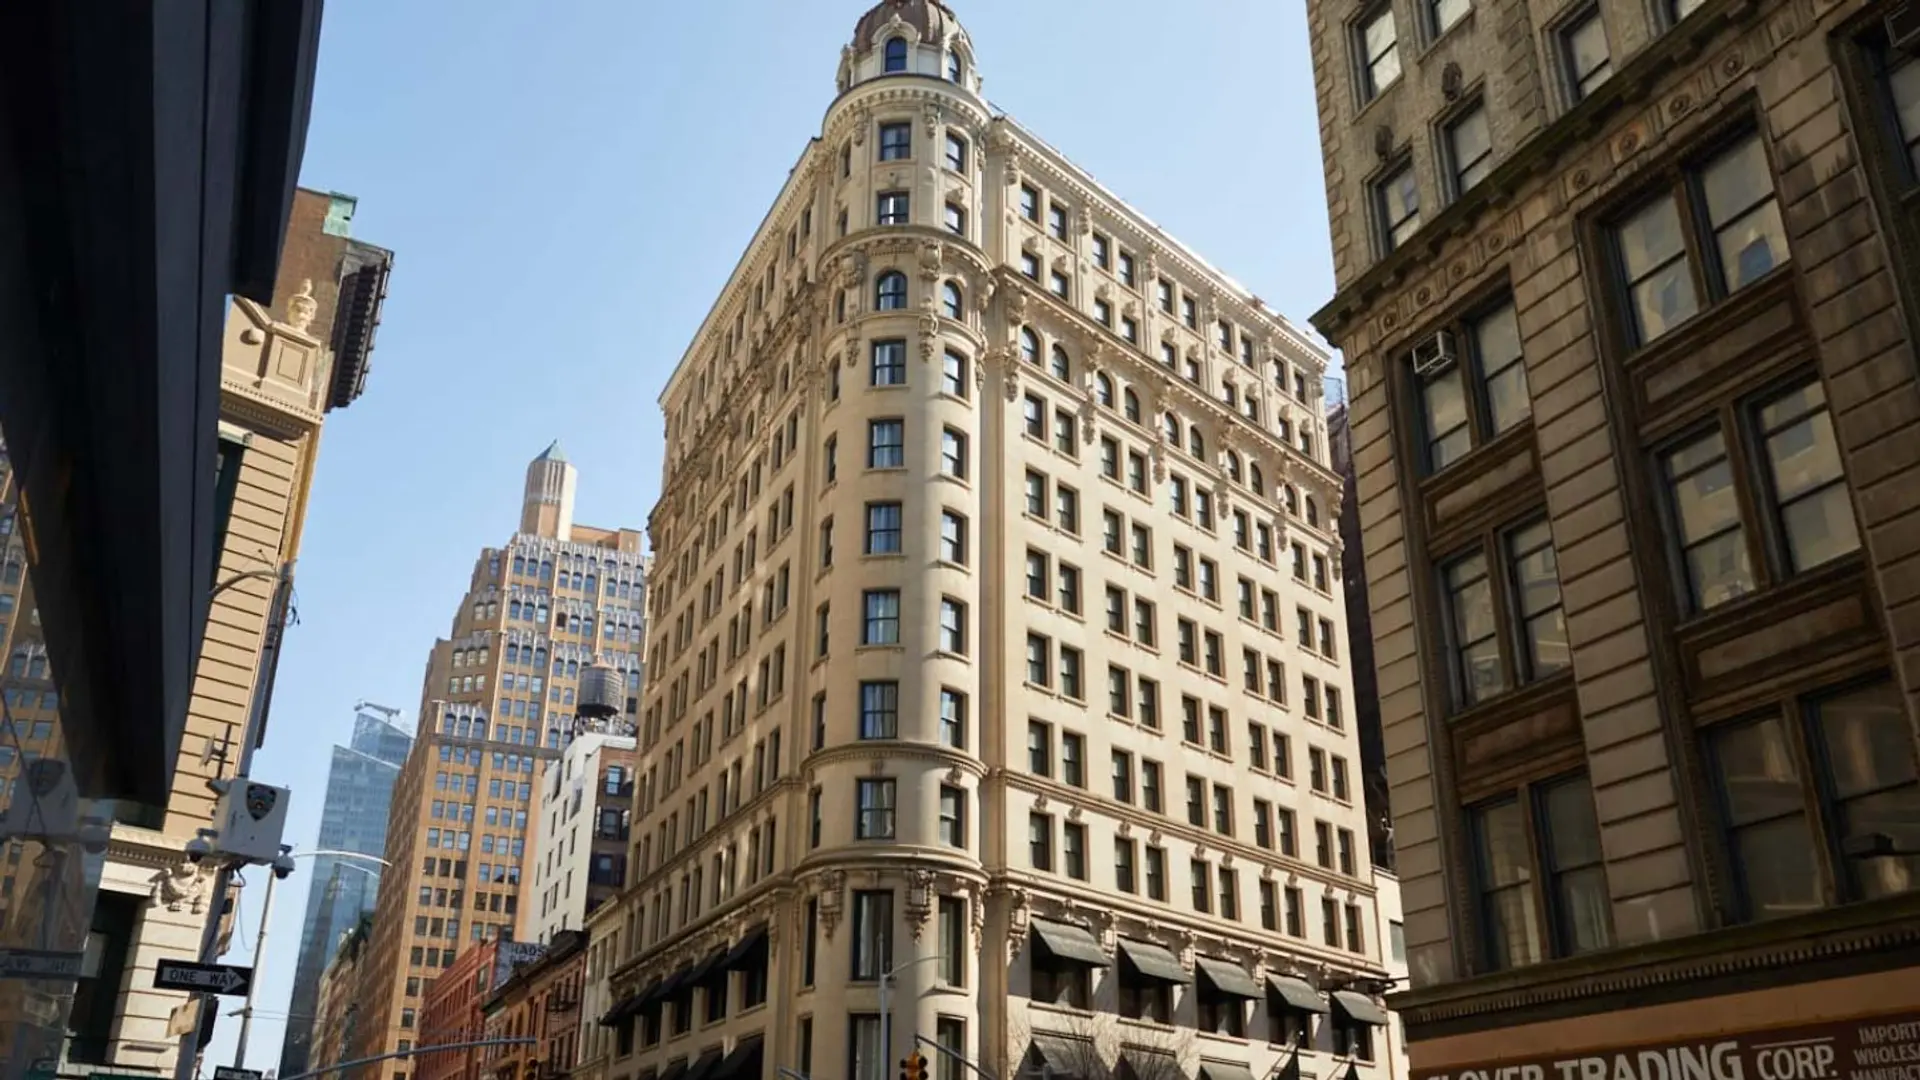 The ned nomad hotel seen from the street